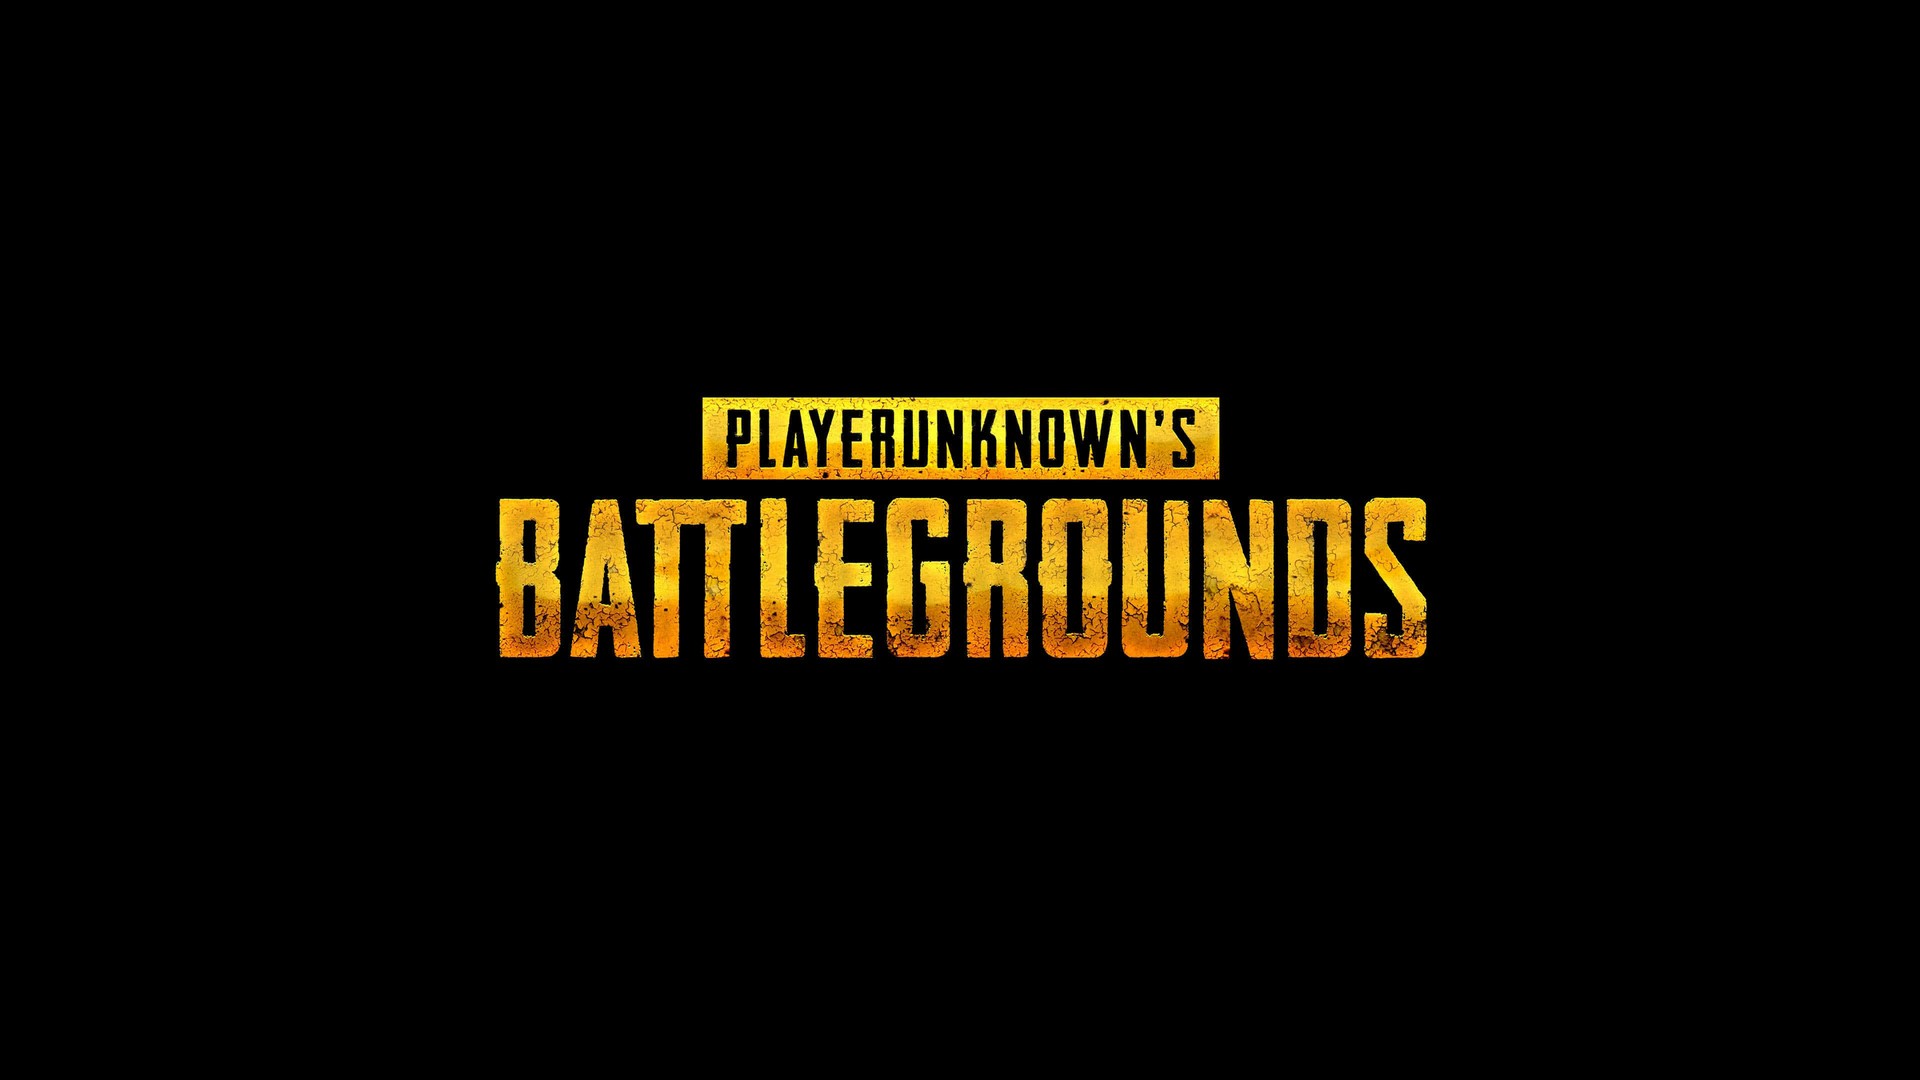 Wallpaper PUBG Xbox One Update Desktop with image resolution 1920x1080 pixel. You can use this wallpaper as background for your desktop Computer Screensavers, Android or iPhone smartphones